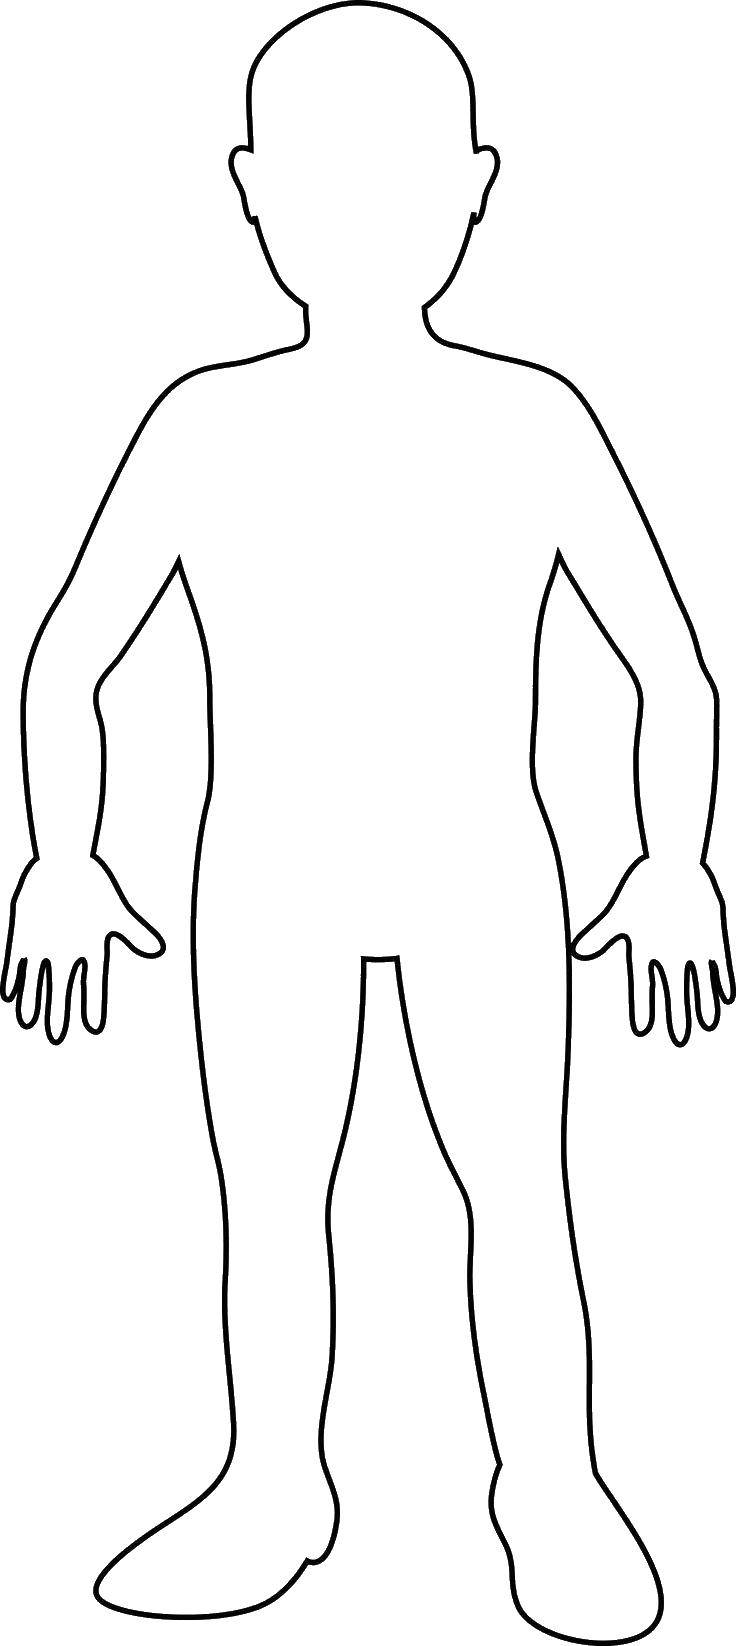 Coloring The outline of a man. Category the outline of a man. Tags:  Outline , man.